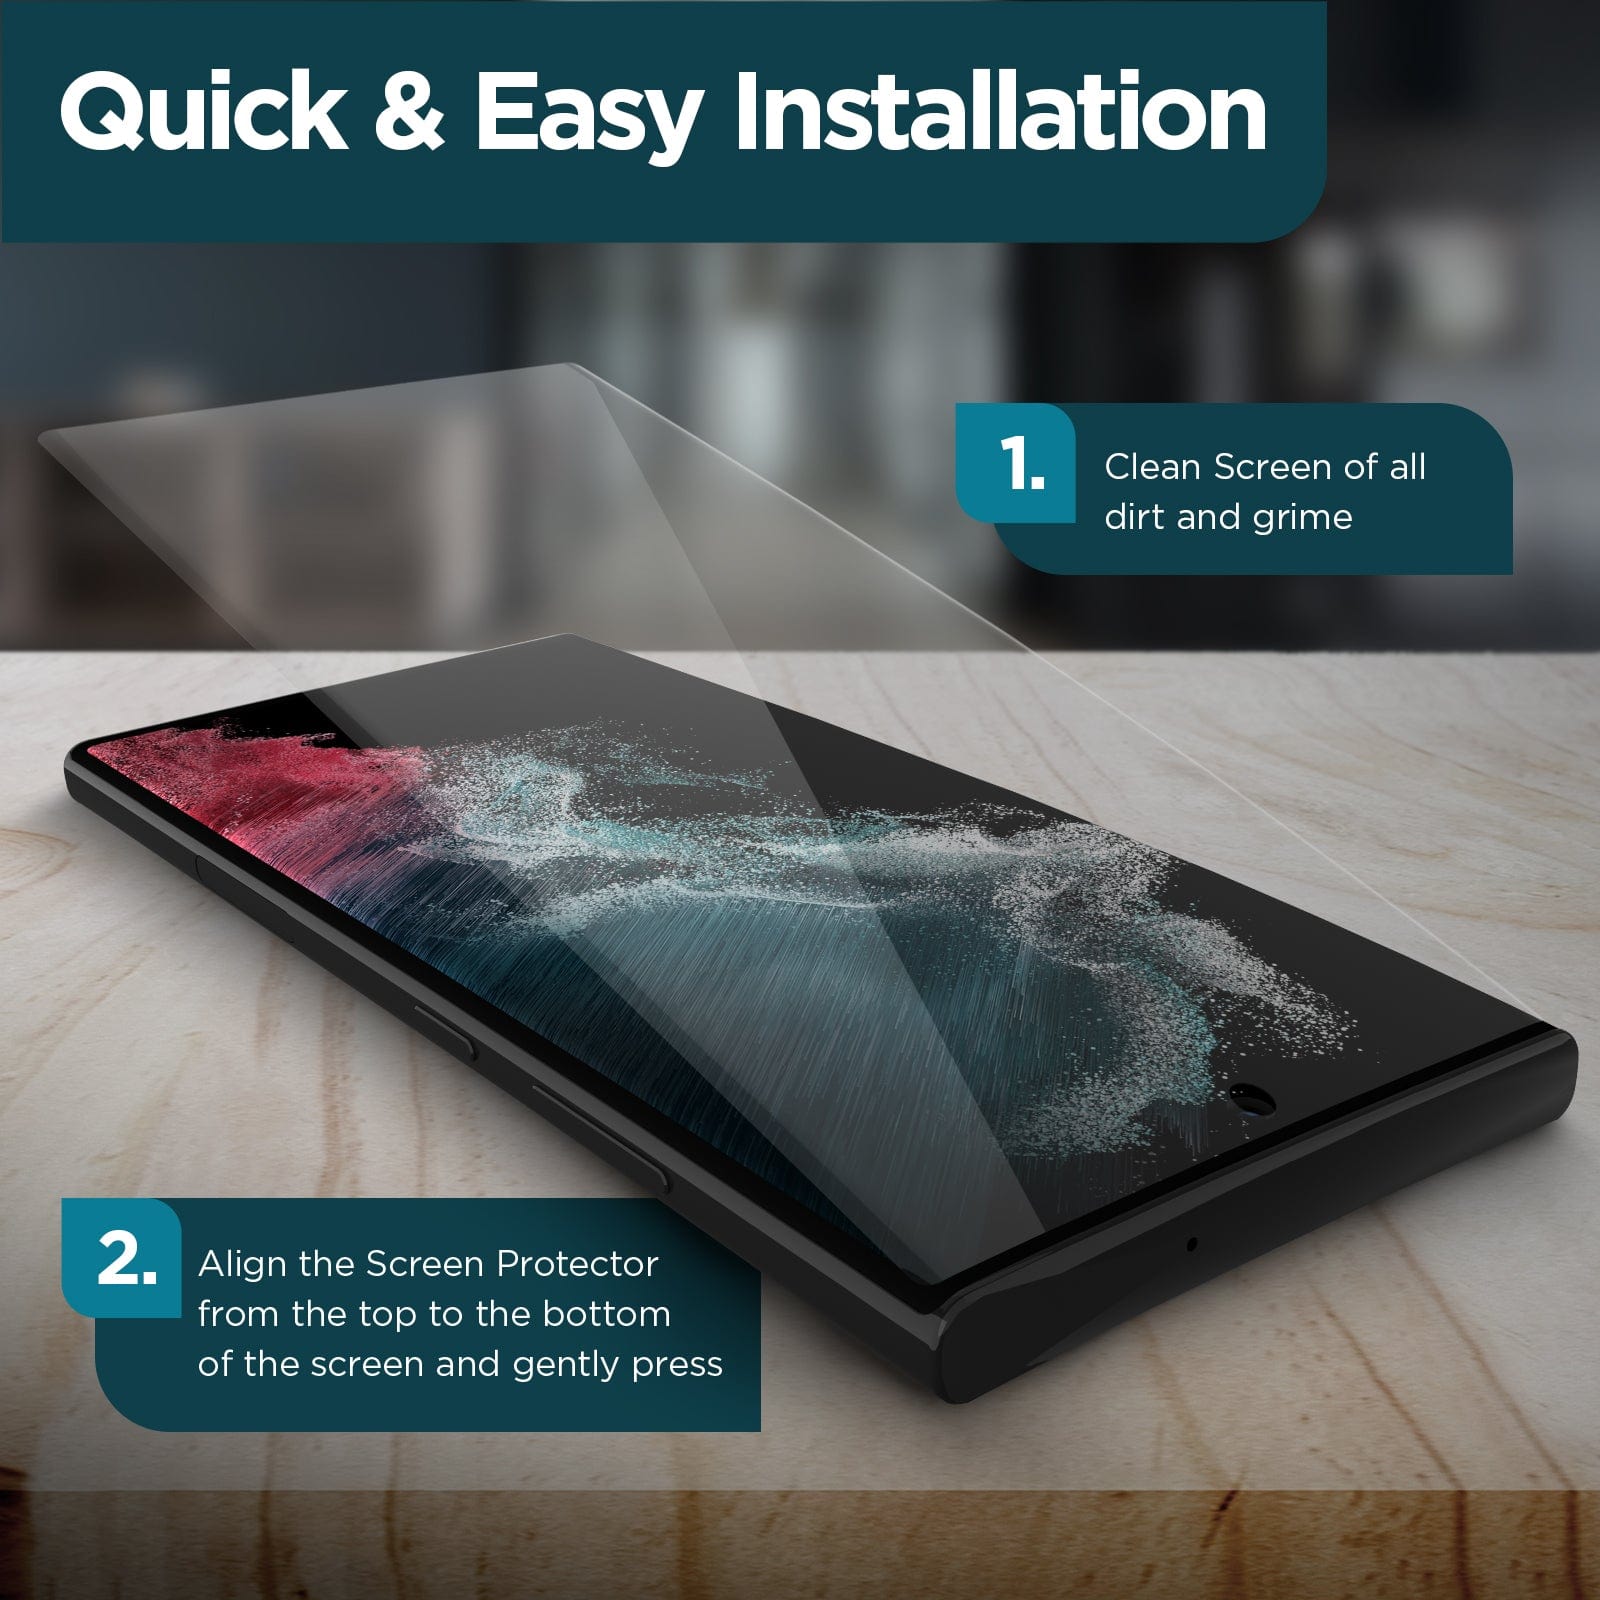 QUICK & EASY INSTALLATION. 1. CLEAN SCREEN OF ALL DIRT AND GRIME. 2. ALIGN THE SCREEN PROTECTOR FROM THE TOP TO THE BOTTOM OF THE SCREEN AND GENTLY PRESS.